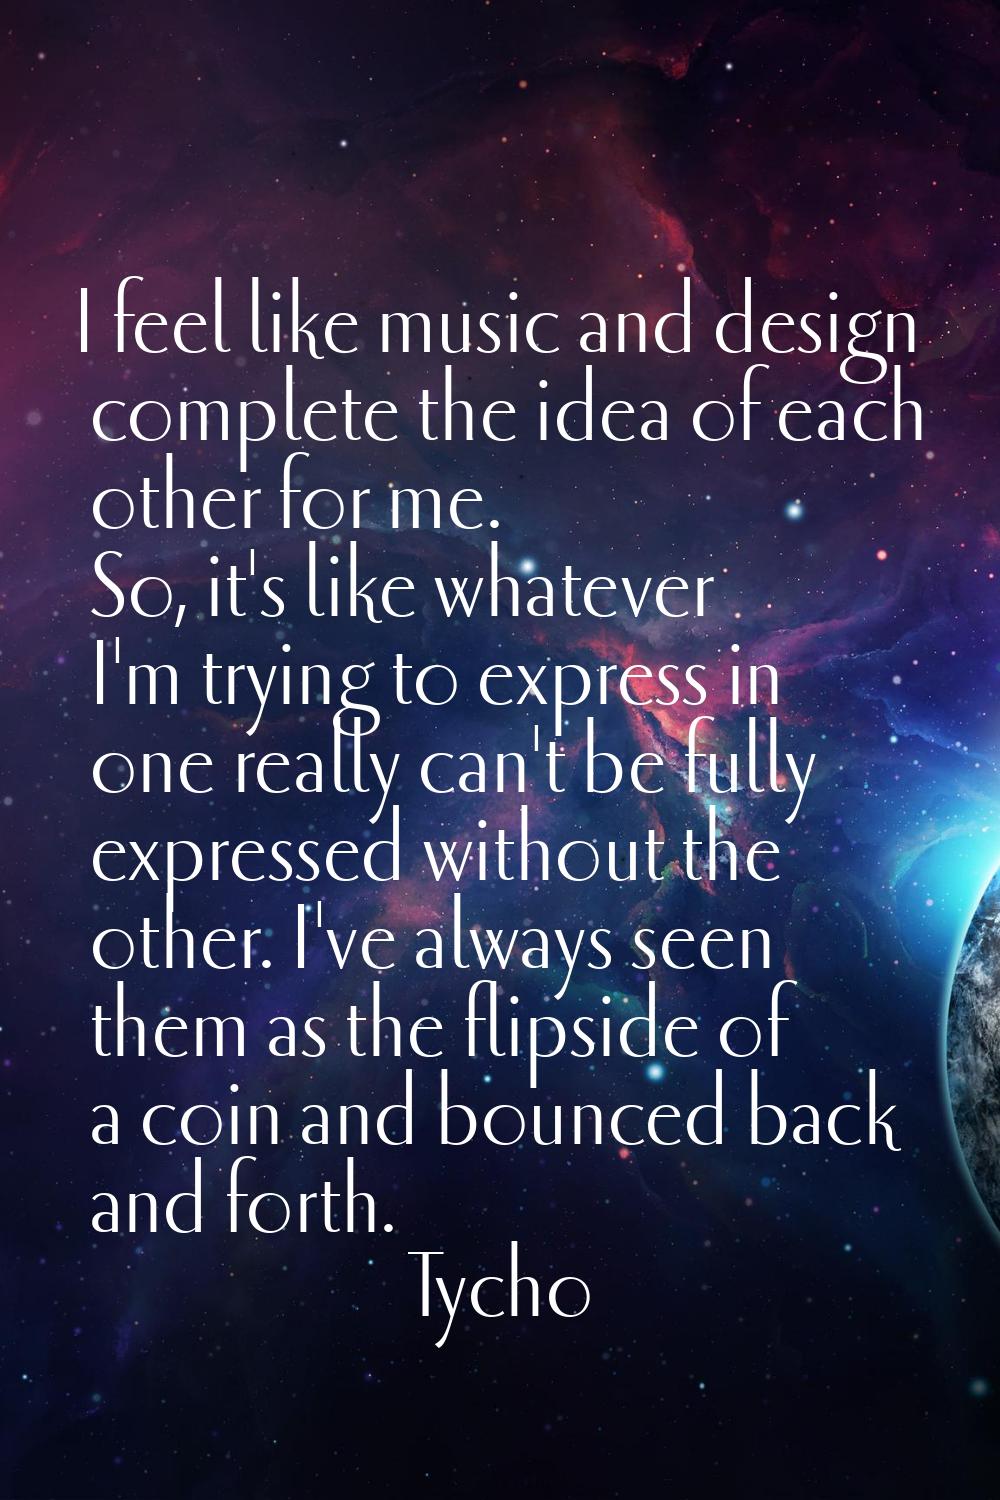 I feel like music and design complete the idea of each other for me. So, it's like whatever I'm try